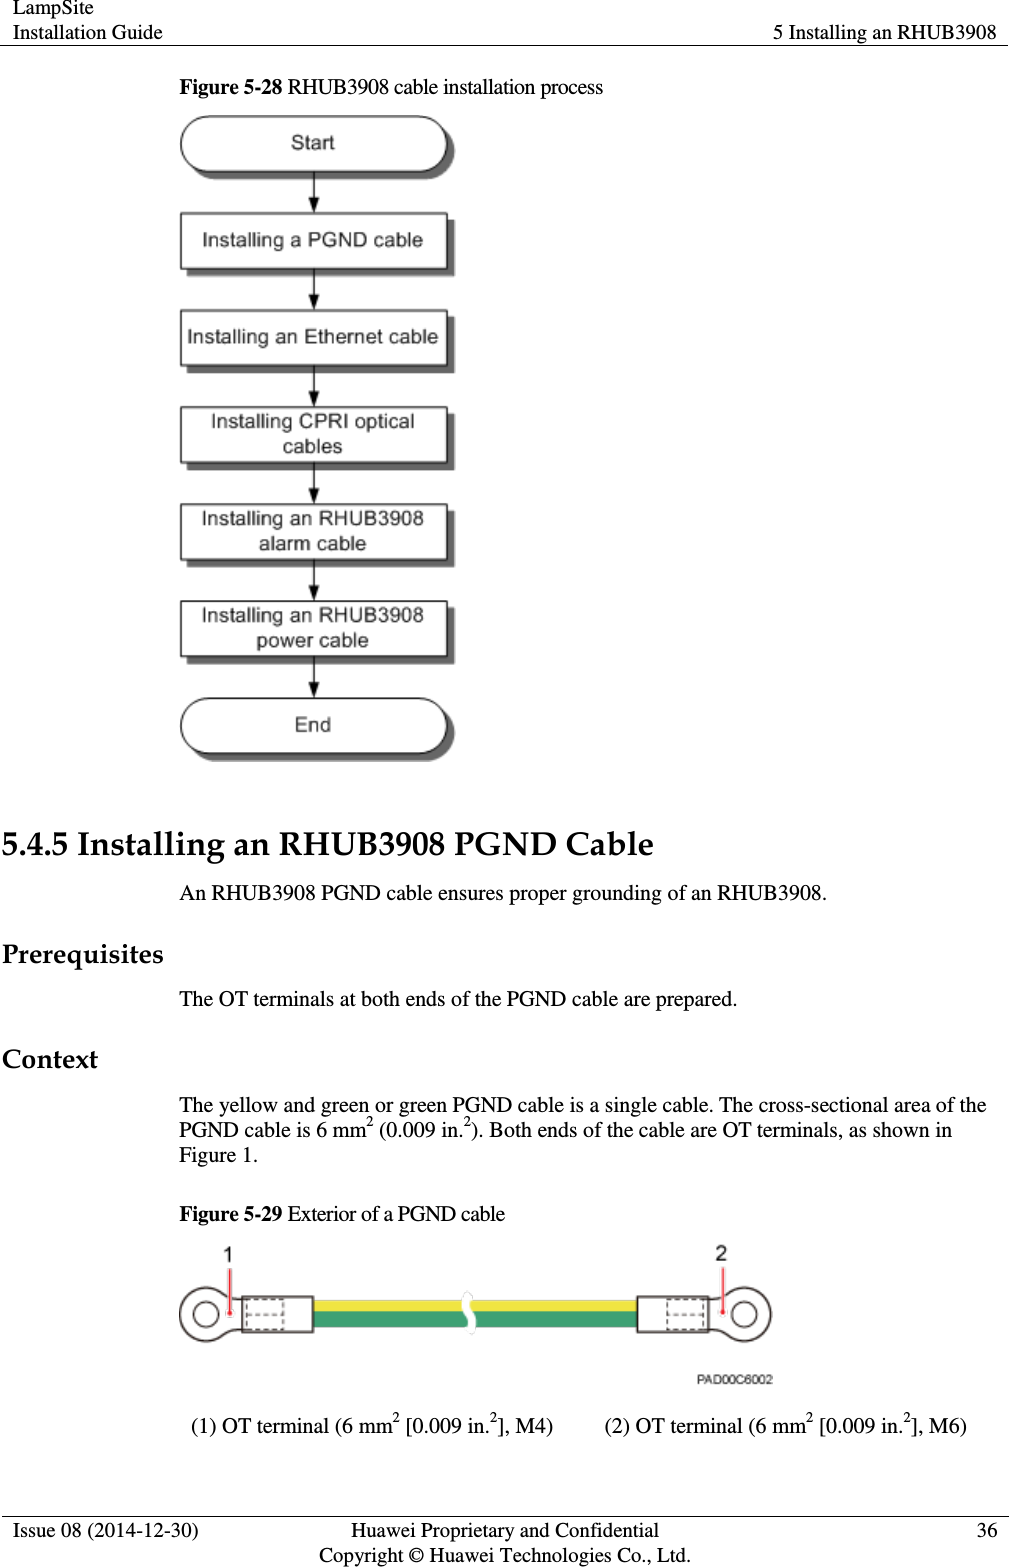 LampSite Installation Guide 5 Installing an RHUB3908  Issue 08 (2014-12-30) Huawei Proprietary and Confidential                                     Copyright © Huawei Technologies Co., Ltd. 36  Figure 5-28 RHUB3908 cable installation process     5.4.5 Installing an RHUB3908 PGND Cable An RHUB3908 PGND cable ensures proper grounding of an RHUB3908.   Prerequisites The OT terminals at both ends of the PGND cable are prepared. Context The yellow and green or green PGND cable is a single cable. The cross-sectional area of the PGND cable is 6 mm2 (0.009 in.2). Both ends of the cable are OT terminals, as shown in Figure 1. Figure 5-29 Exterior of a PGND cable  (1) OT terminal (6 mm2 [0.009 in.2], M4) (2) OT terminal (6 mm2 [0.009 in.2], M6) 